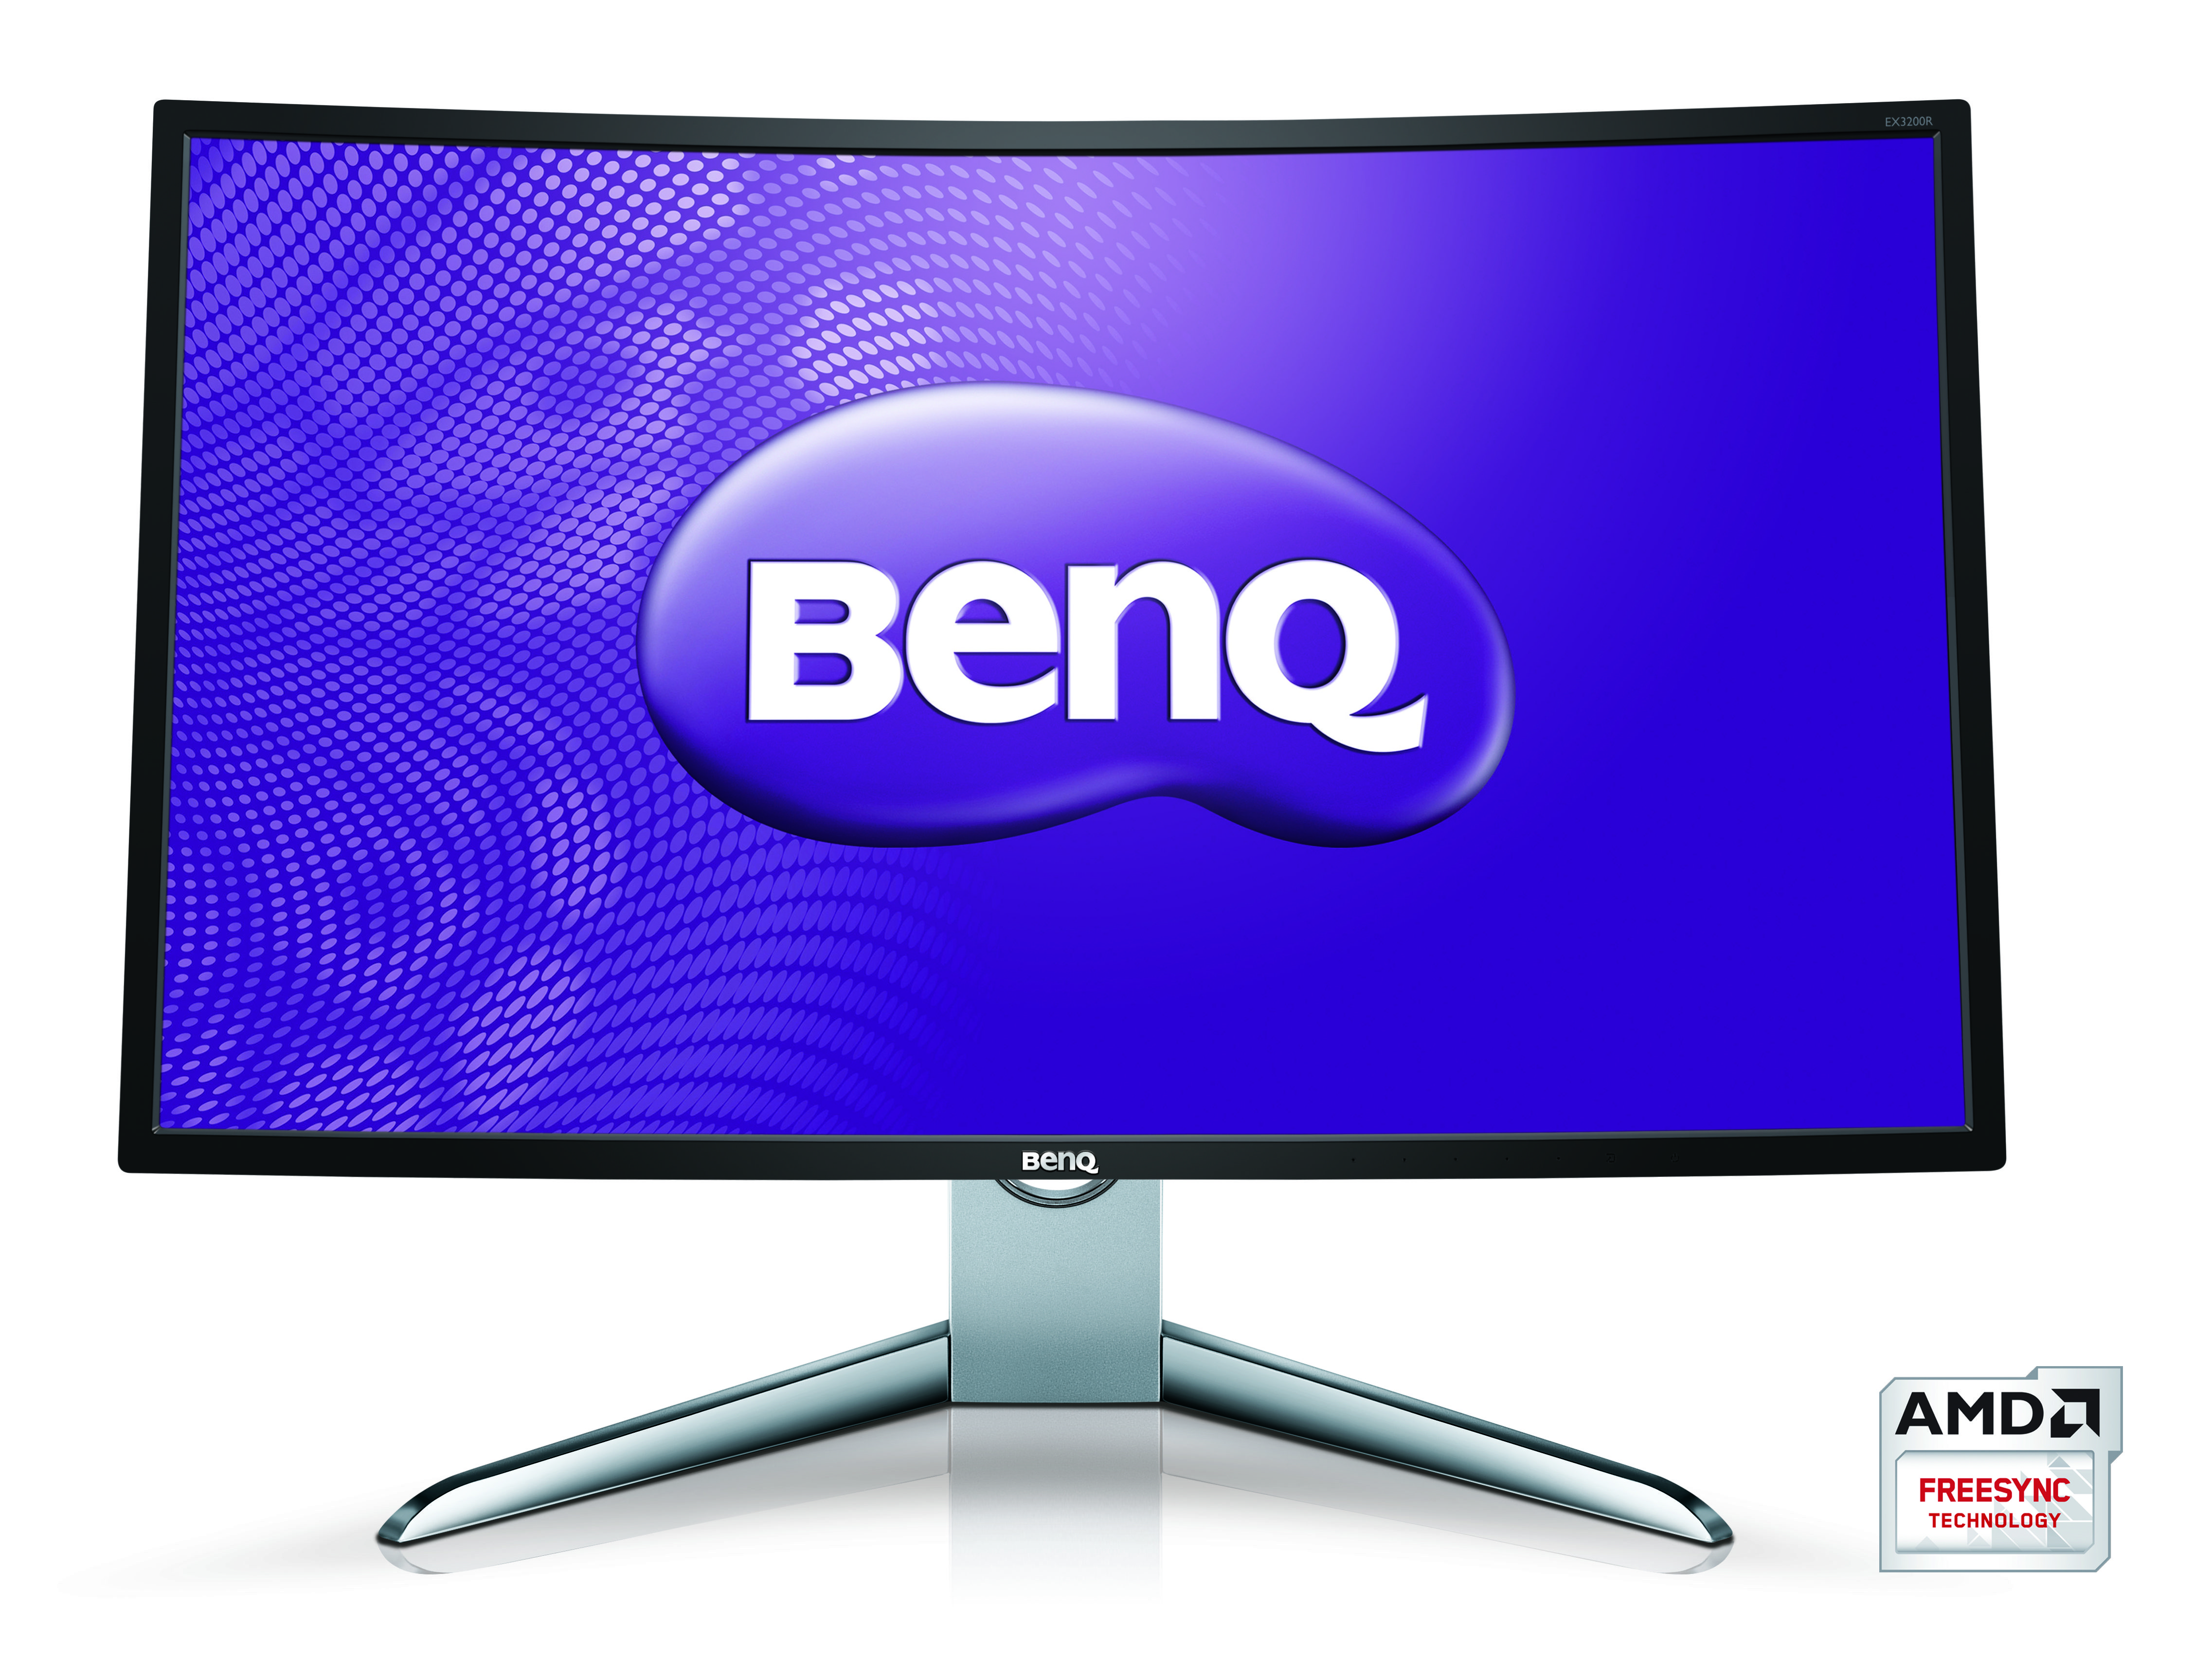 BenQ launches EX3200R curved monitor with 144 hz refresh rate and AMD FreeSync technology